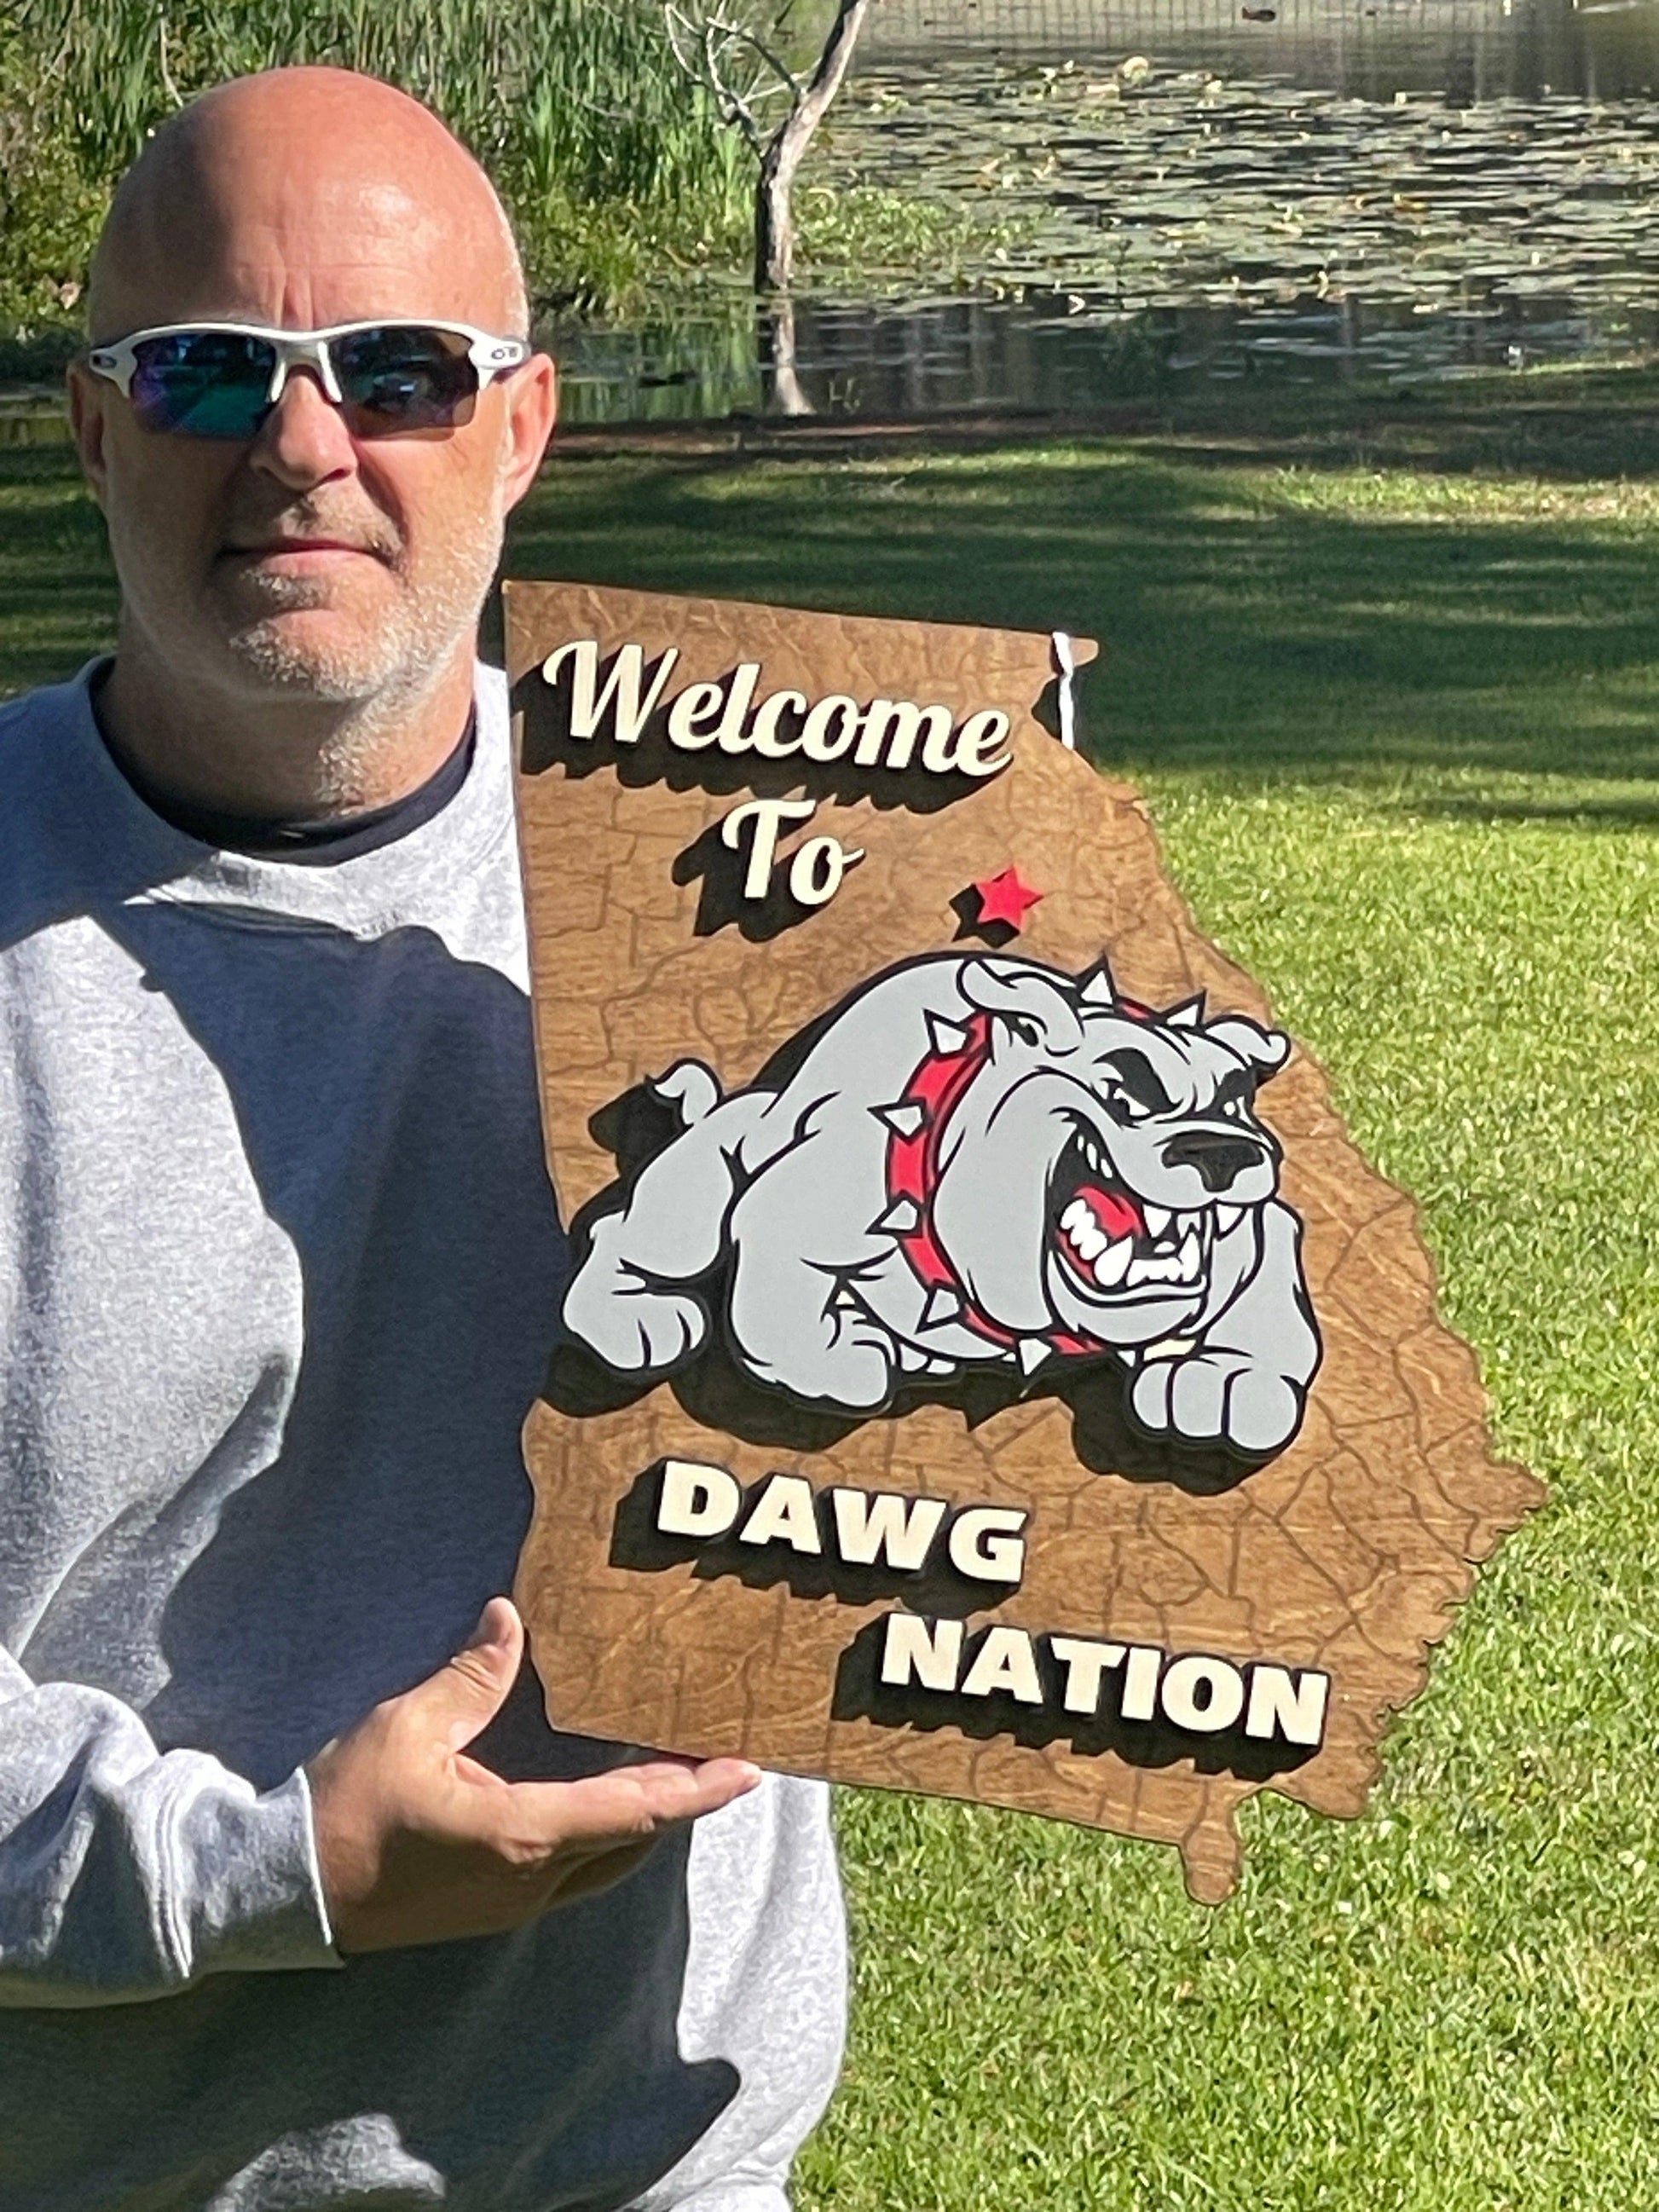 DAWG NATION - Live Loud Creations